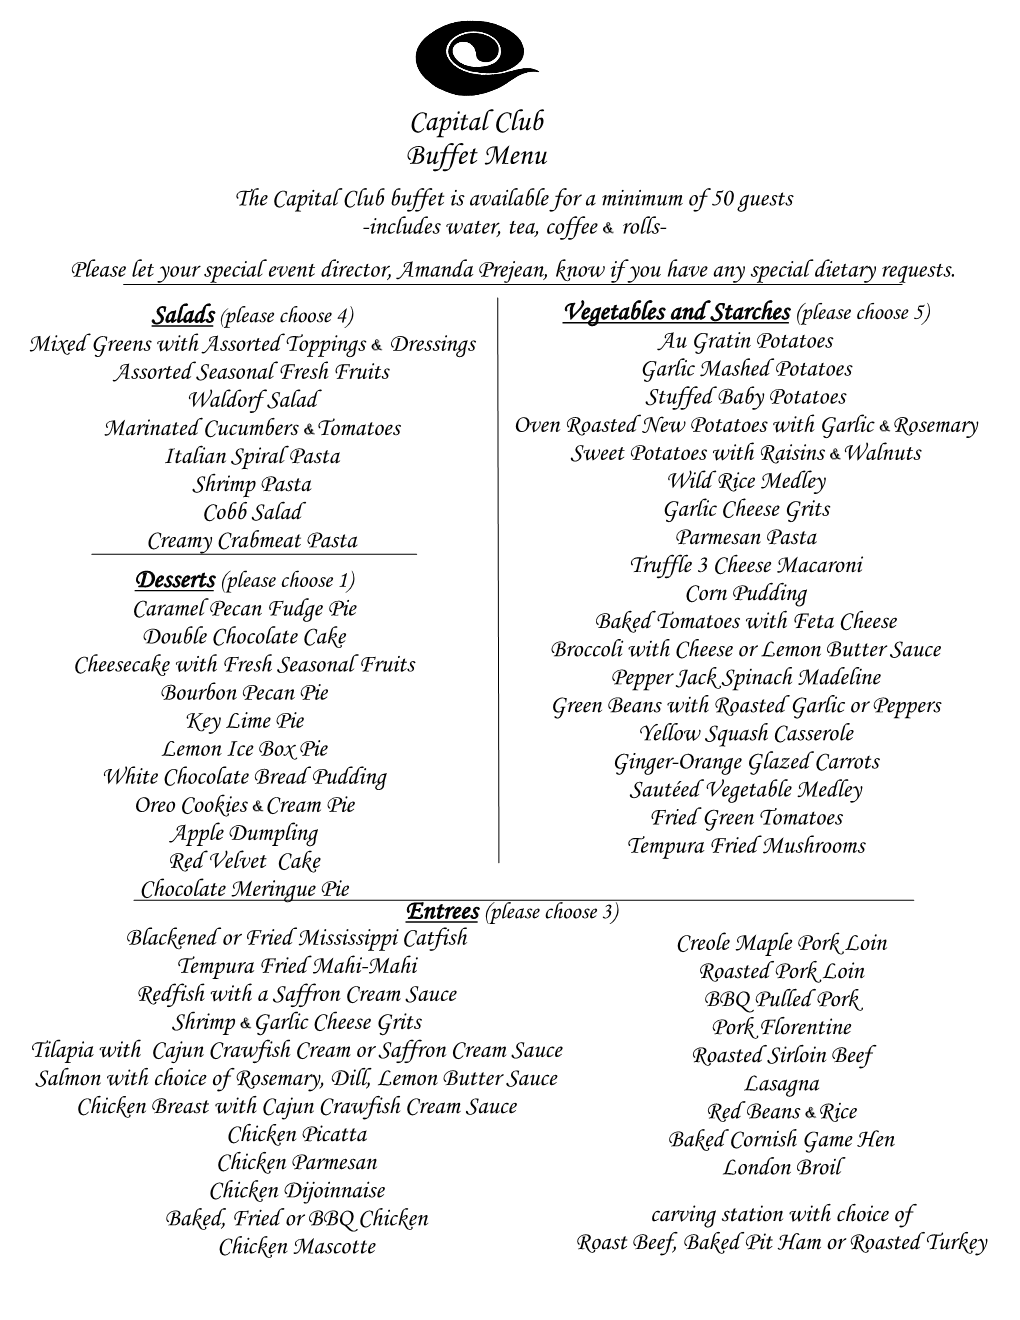 Capital Club Buffet Menu the Capital Club Buffet Is Available for a Minimum of 50 Guests -Includes Water, Tea, Coffee & Rolls